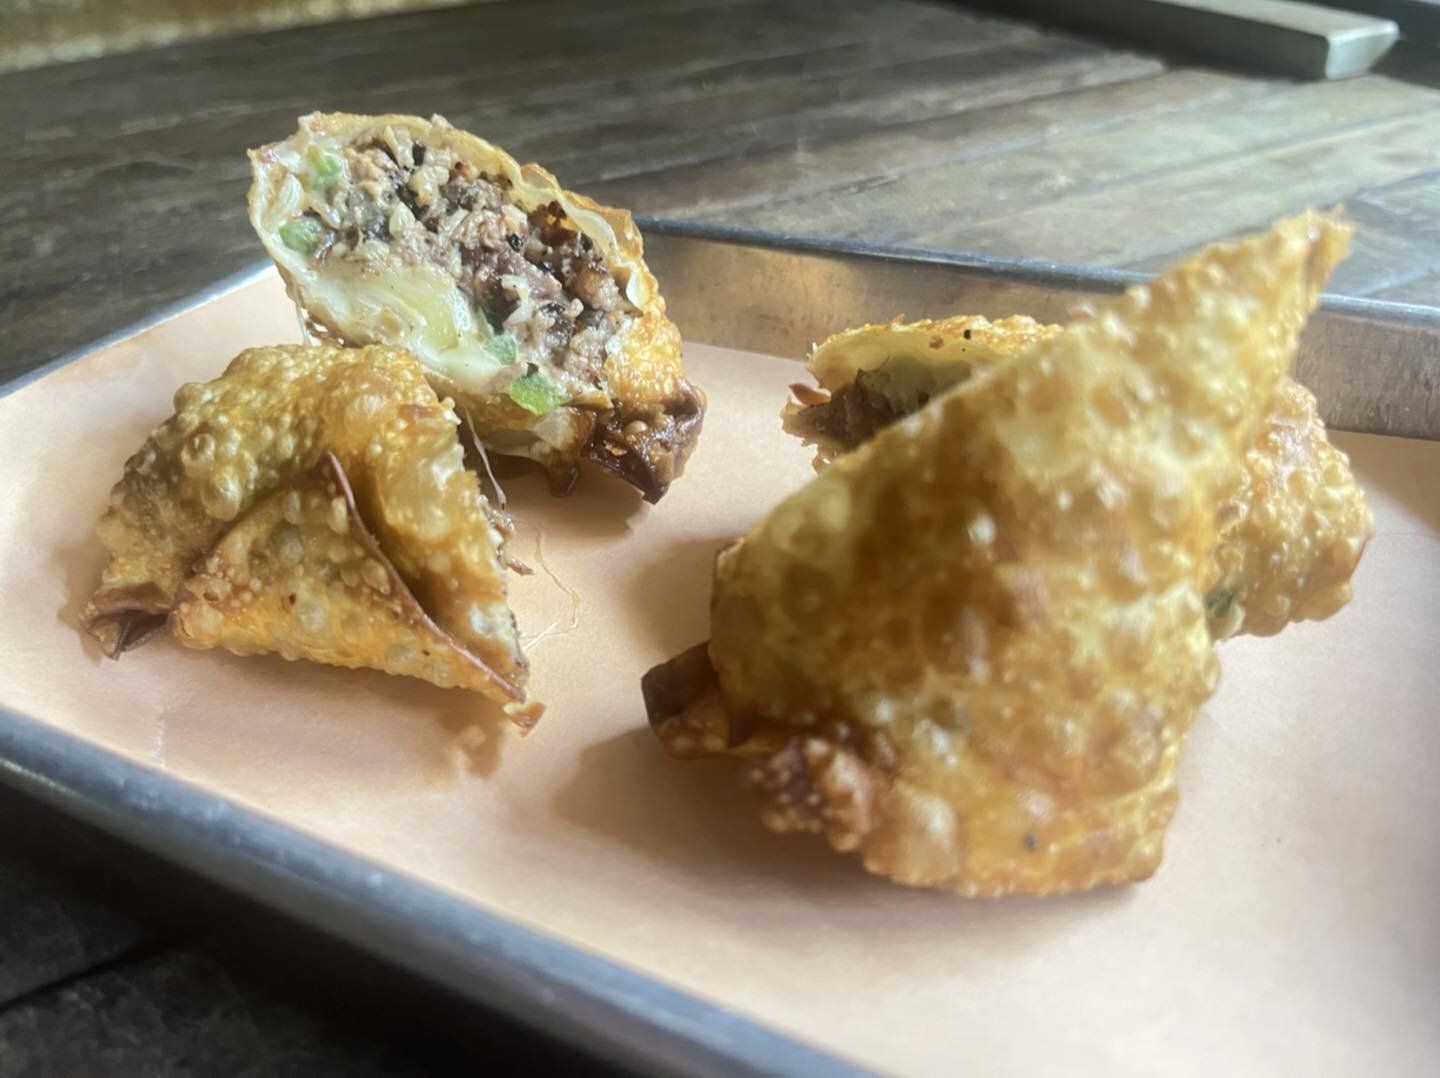 Brighten this gloomy day! Come out and try our new Armadillo Rolls - egg rolls stuffed with brisket, jalape&ntilde;os, Gouda, and our spicy bbq aioli!

#bbqlovers #easttexas #bbq #texasbbq #cedarcreeklaketx #brisket #cedarcreeklake #cedarcreek #smoke